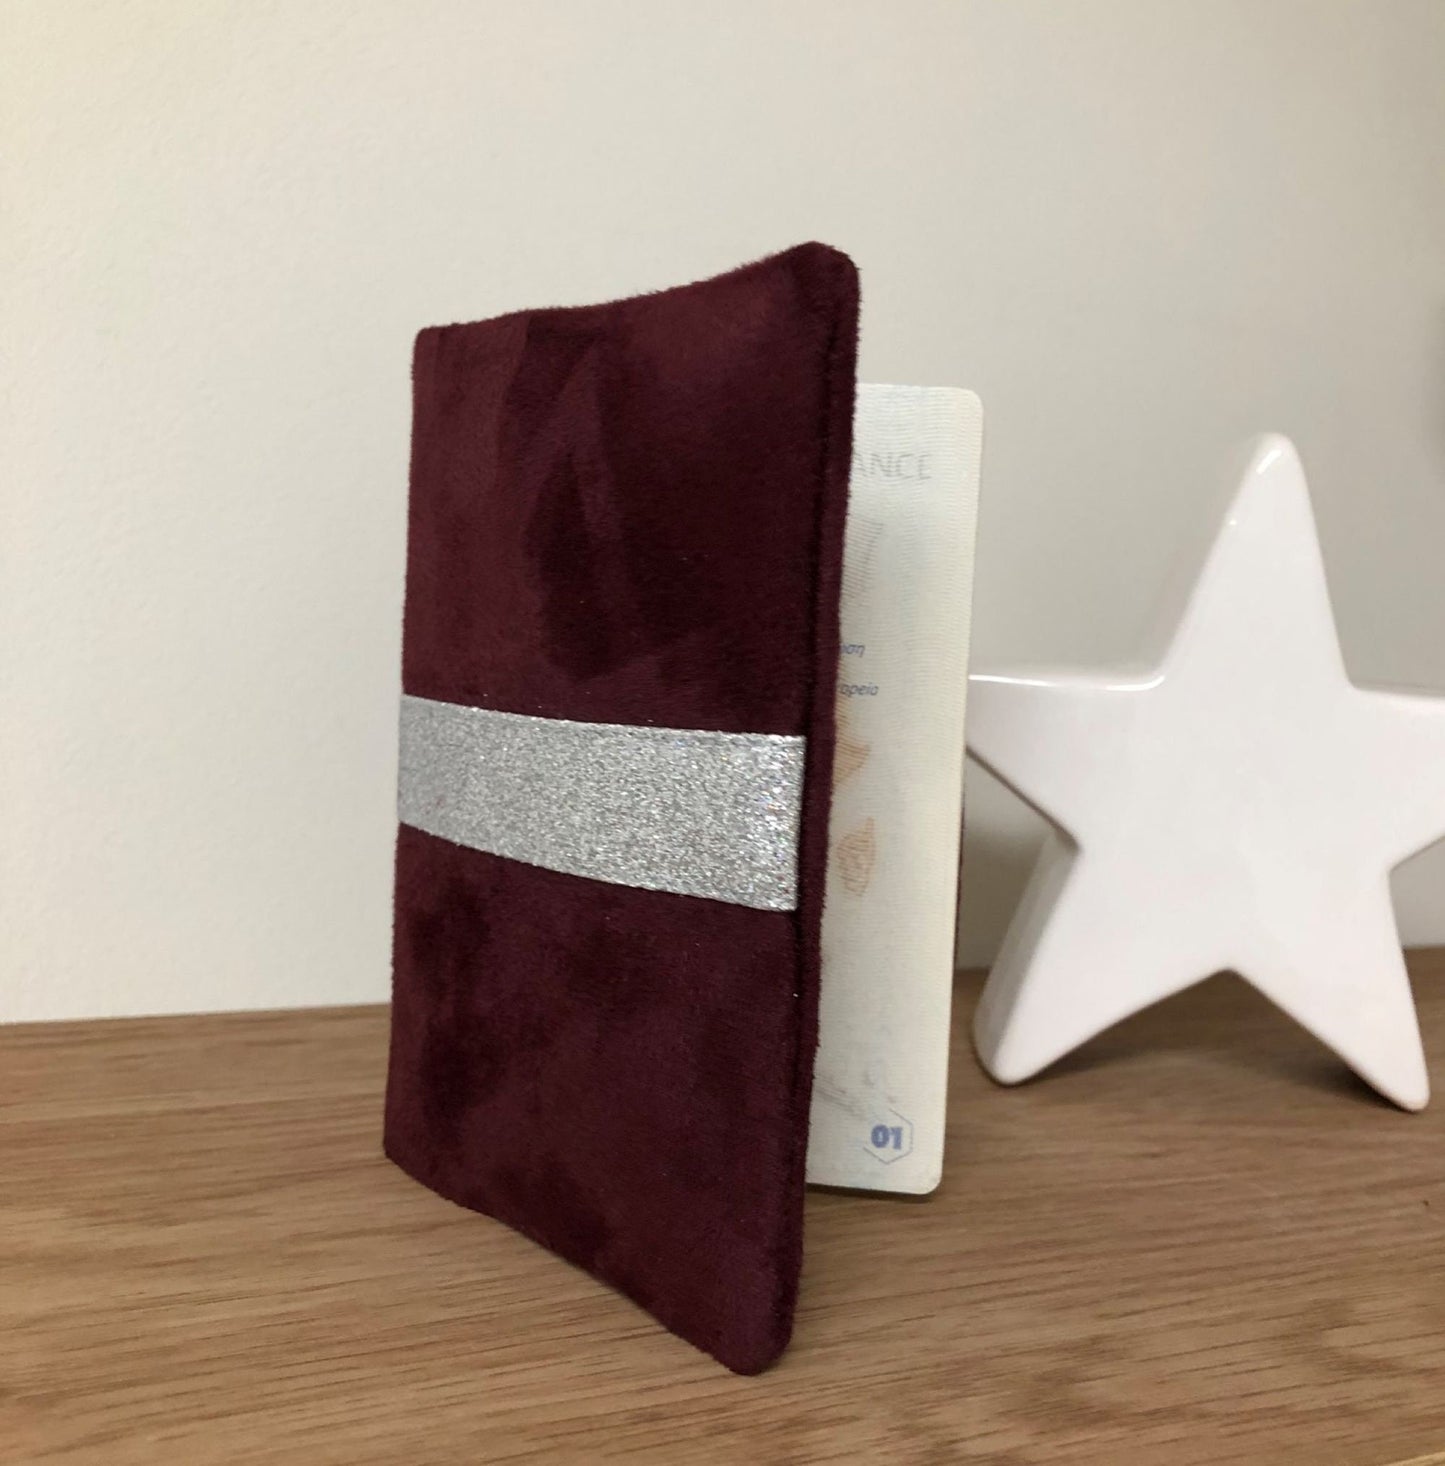 Burgundy passport cover with silver sequins